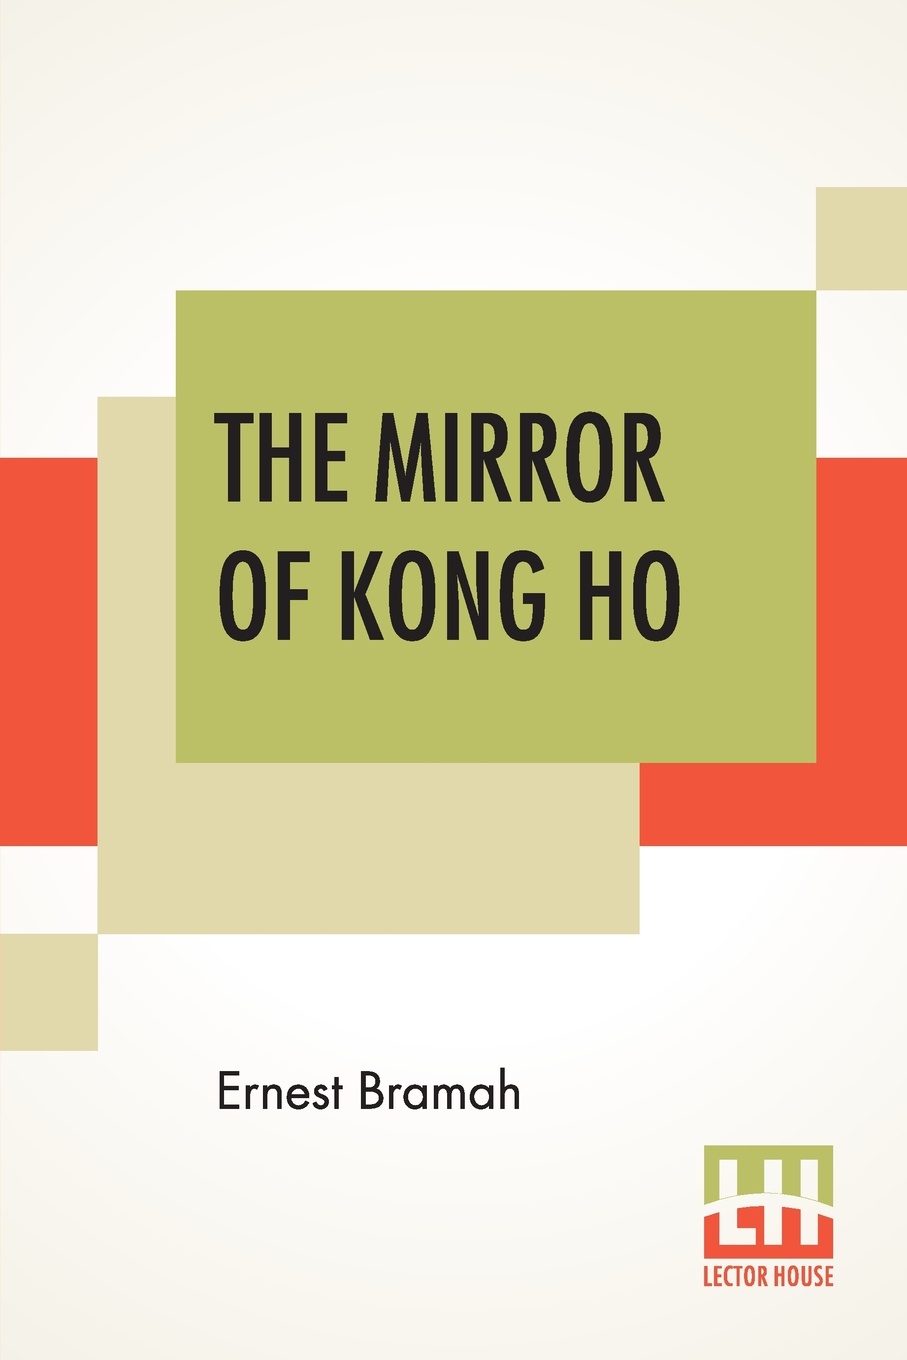 The Mirror Of Kong Ho. A Lively And Amusing Collection Of Letters On Western Living Written By Kong Ho, A Chinese Gentleman. These Addressed To His Homeland, Refer To The Westerners In London As Barbarians And Many Of The Aids To Life In Our Socie...